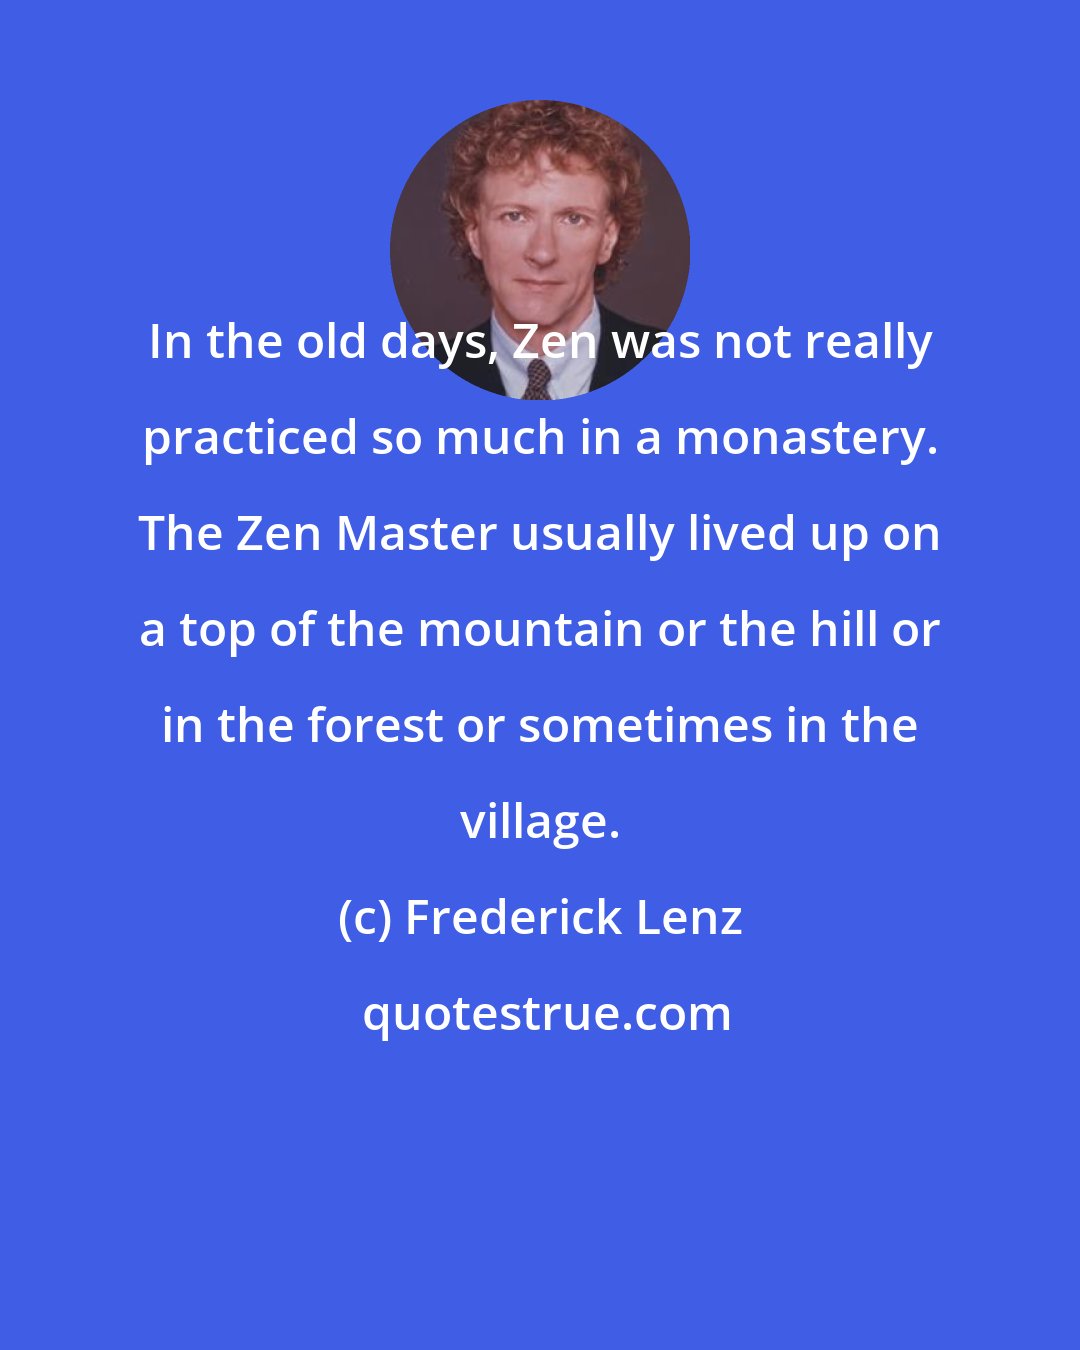 Frederick Lenz: In the old days, Zen was not really practiced so much in a monastery. The Zen Master usually lived up on a top of the mountain or the hill or in the forest or sometimes in the village.